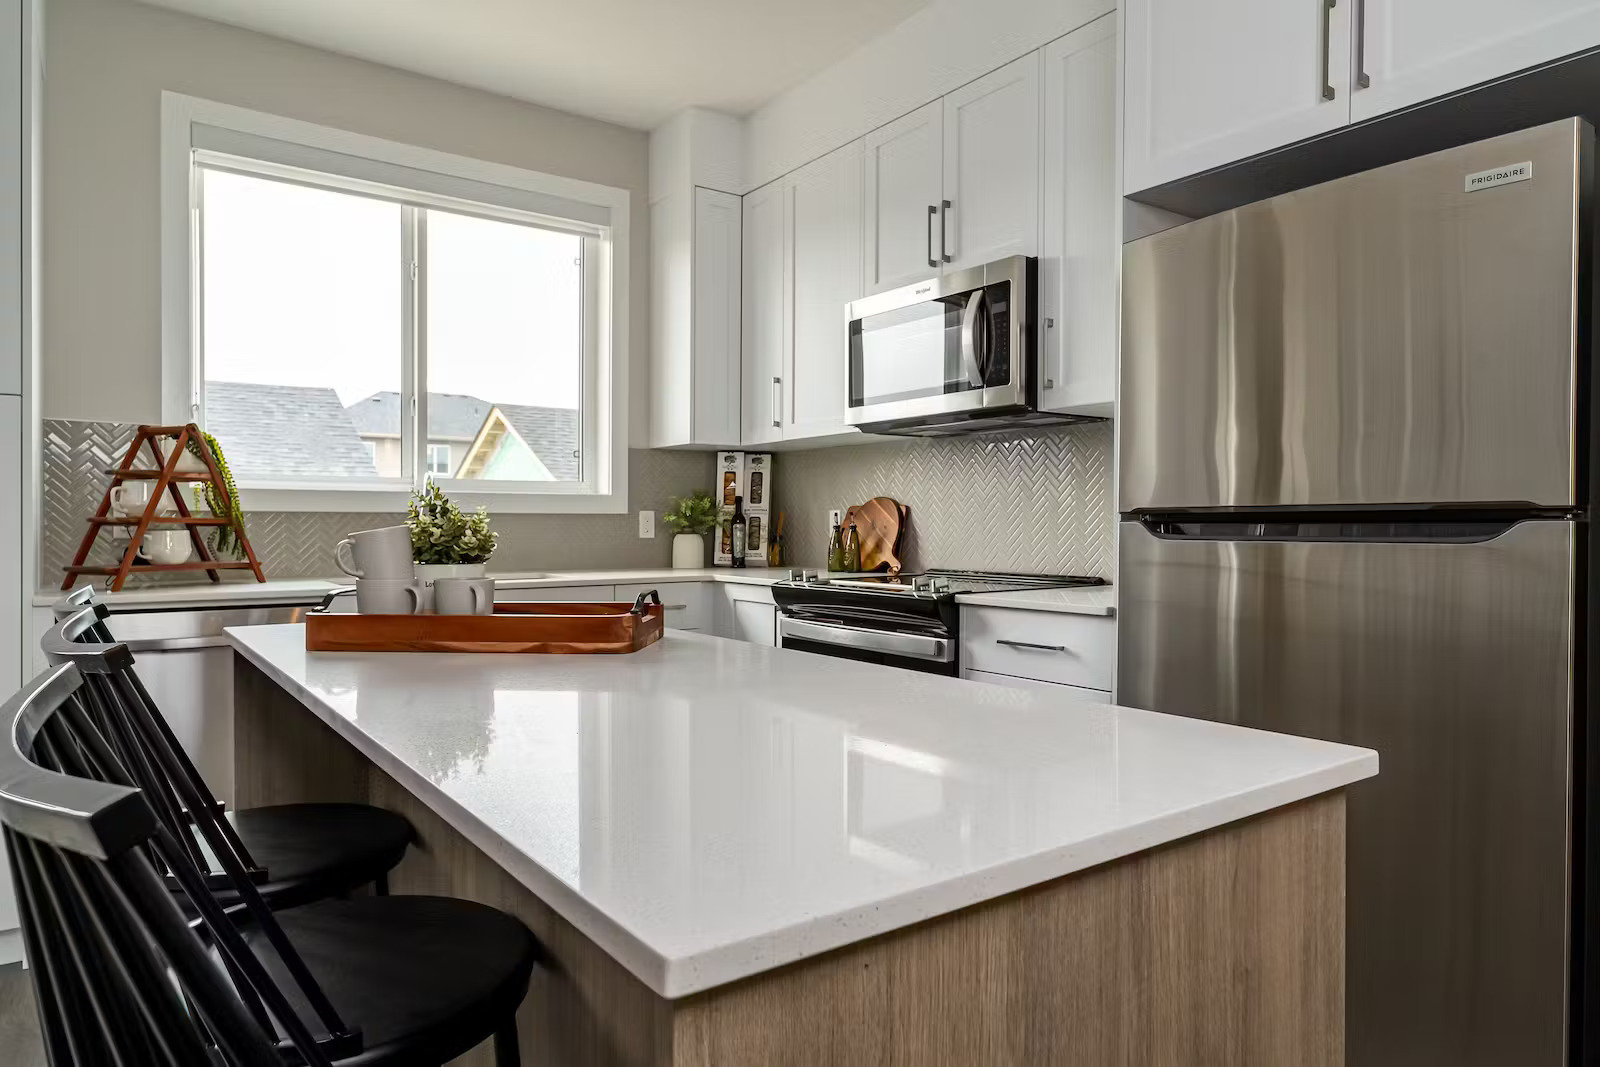 Kitchen in Sirroco townhomes for sale, SW Calgary, AB